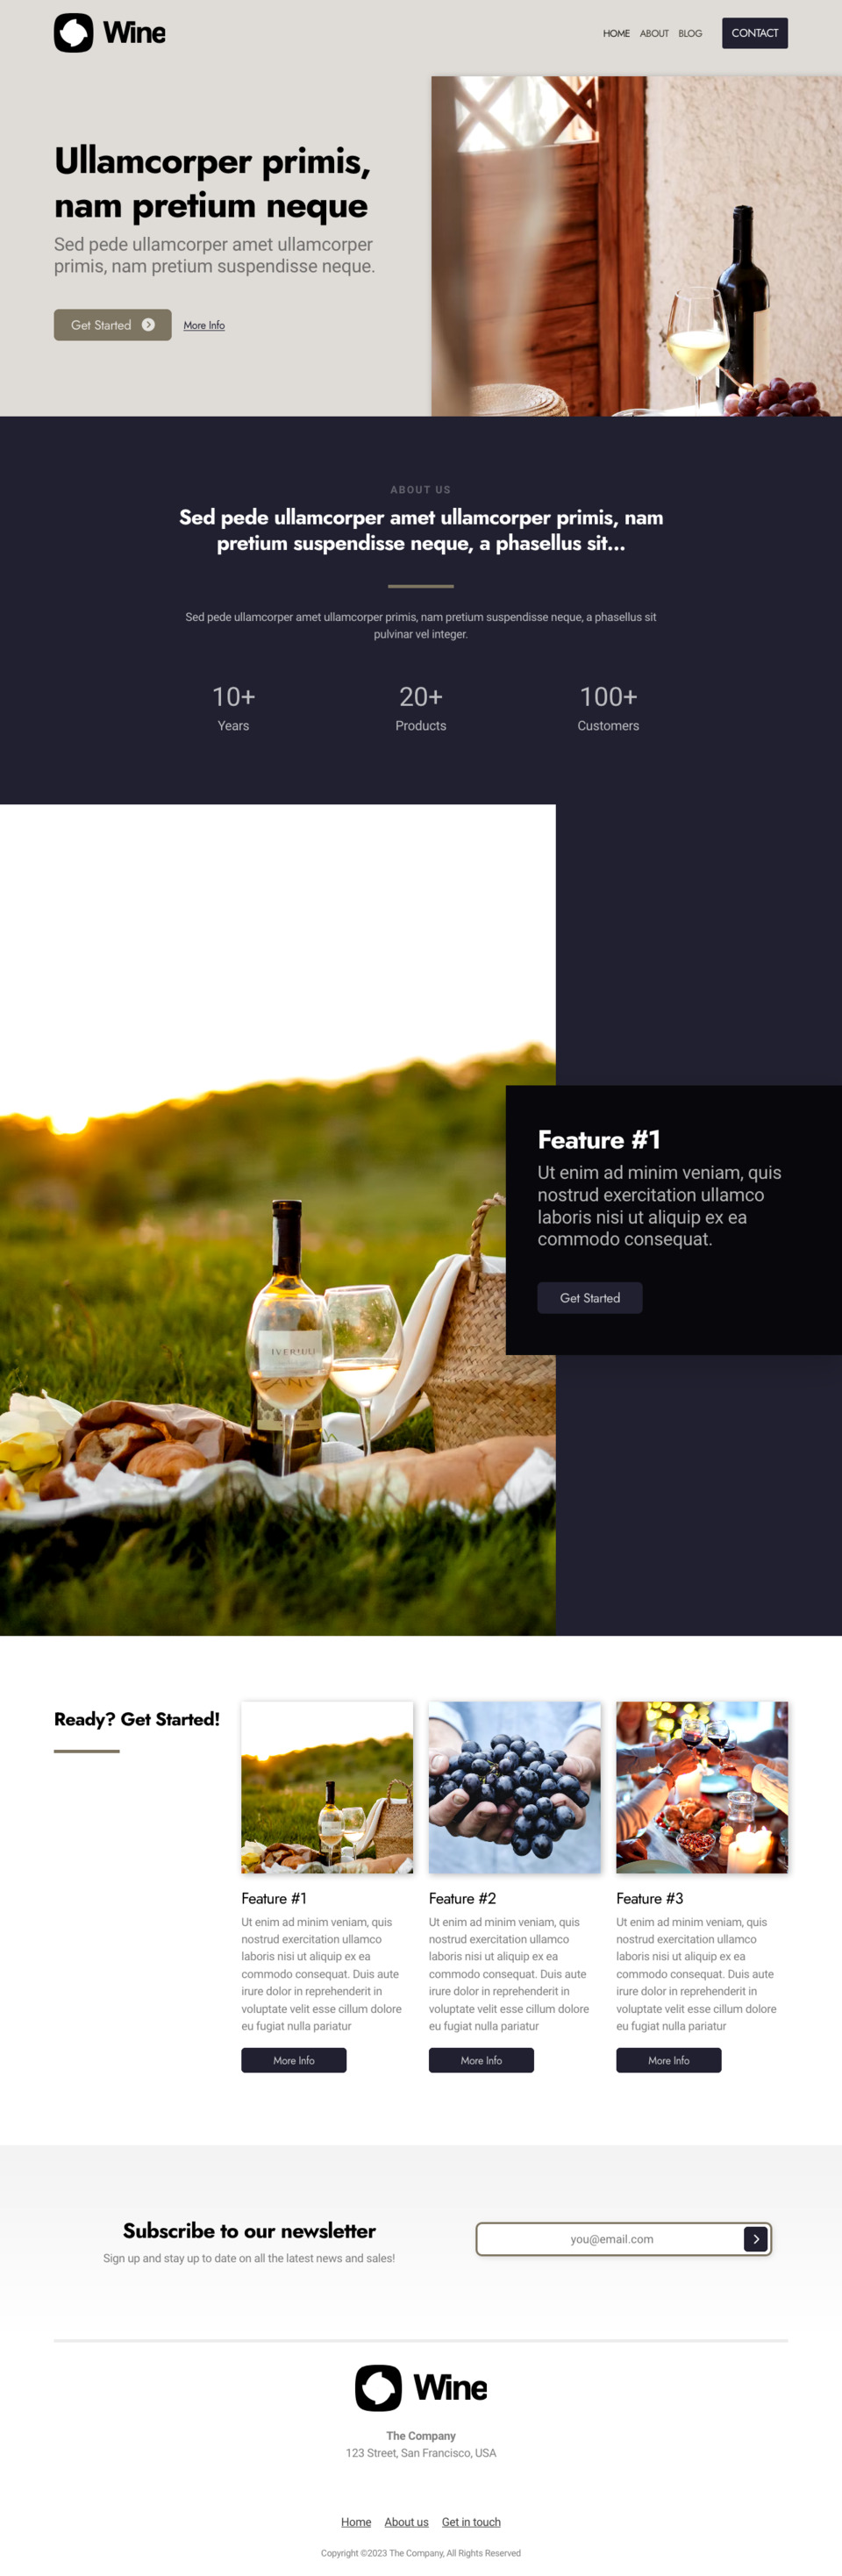 Wine Website Template - Ideal for Wineries, Wine Bars, Wine Shops, Wine Clubs, and Wine Enthusiasts